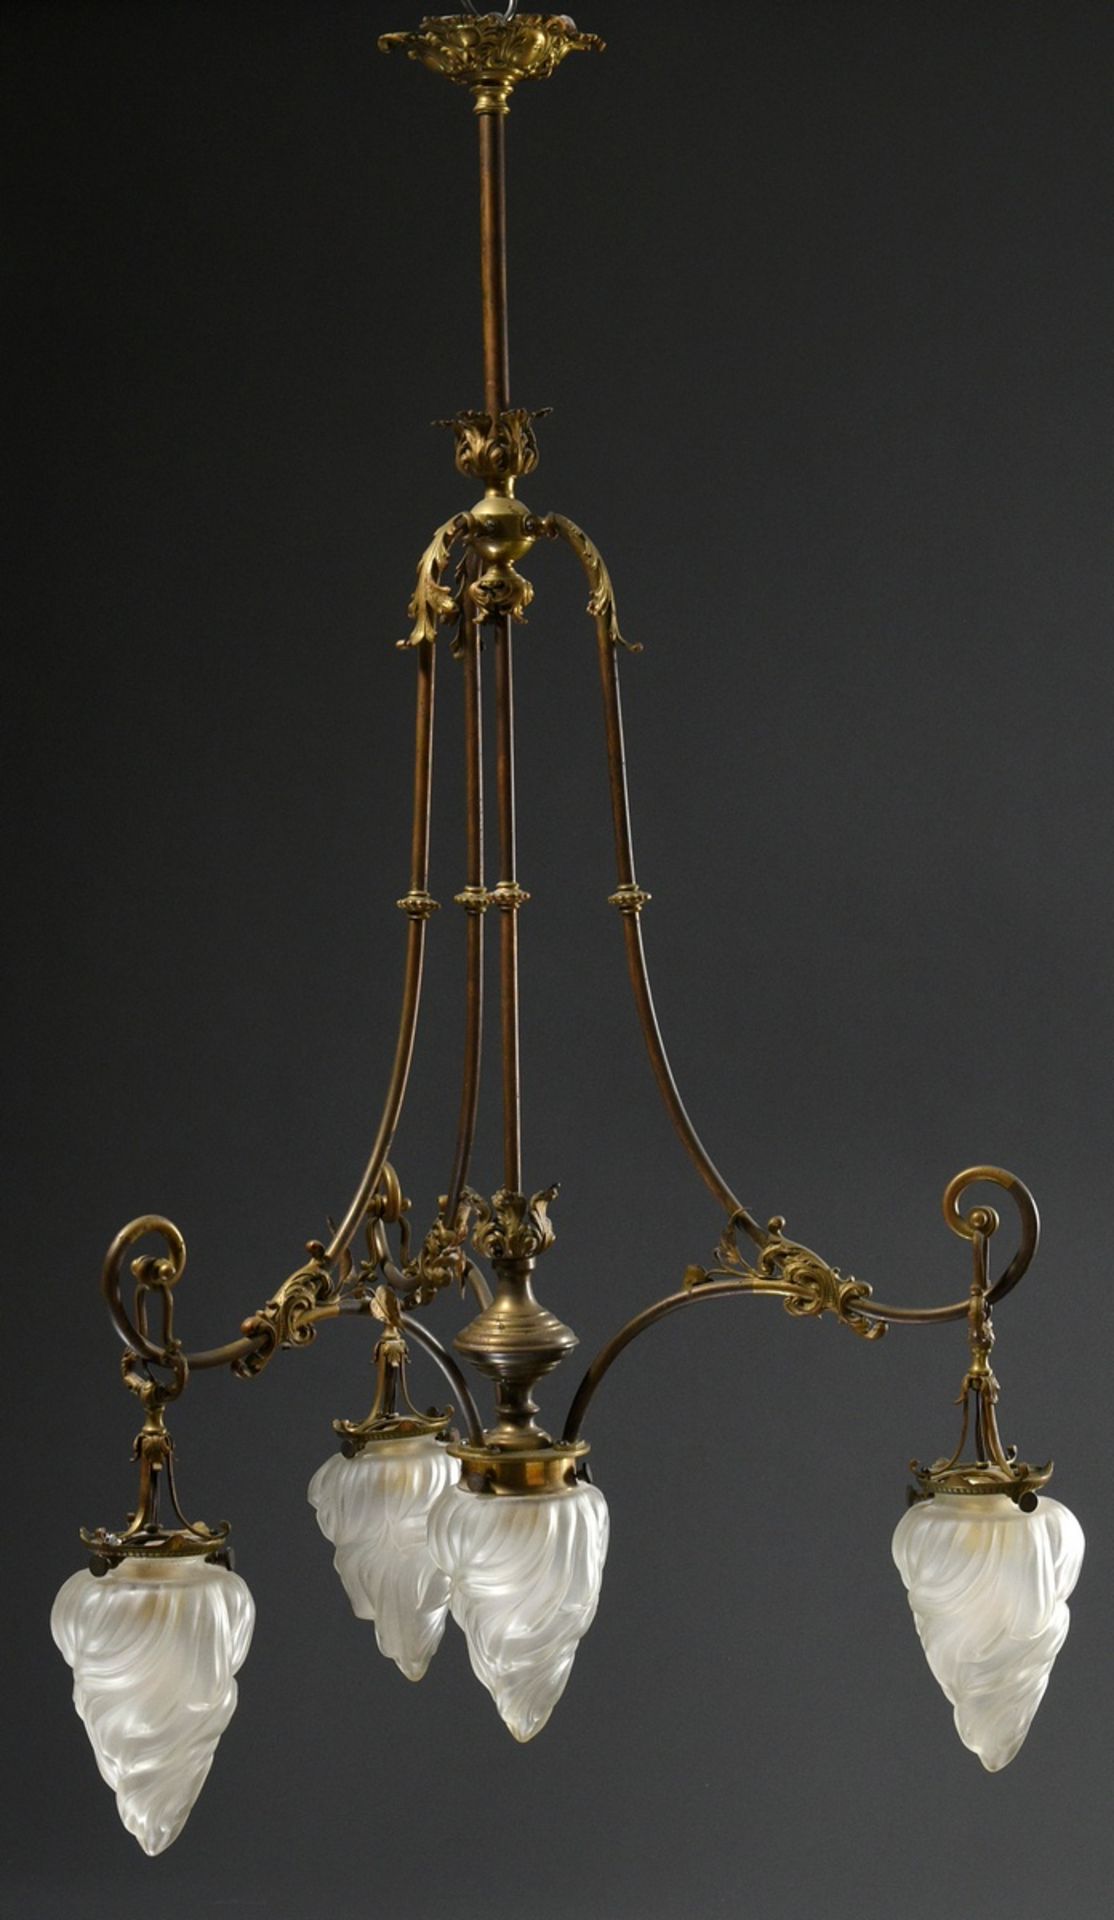 Wilhelminian period ceiling lamp with 4 frosted "flames" glass domes on brass frame with floral dec - Image 2 of 12